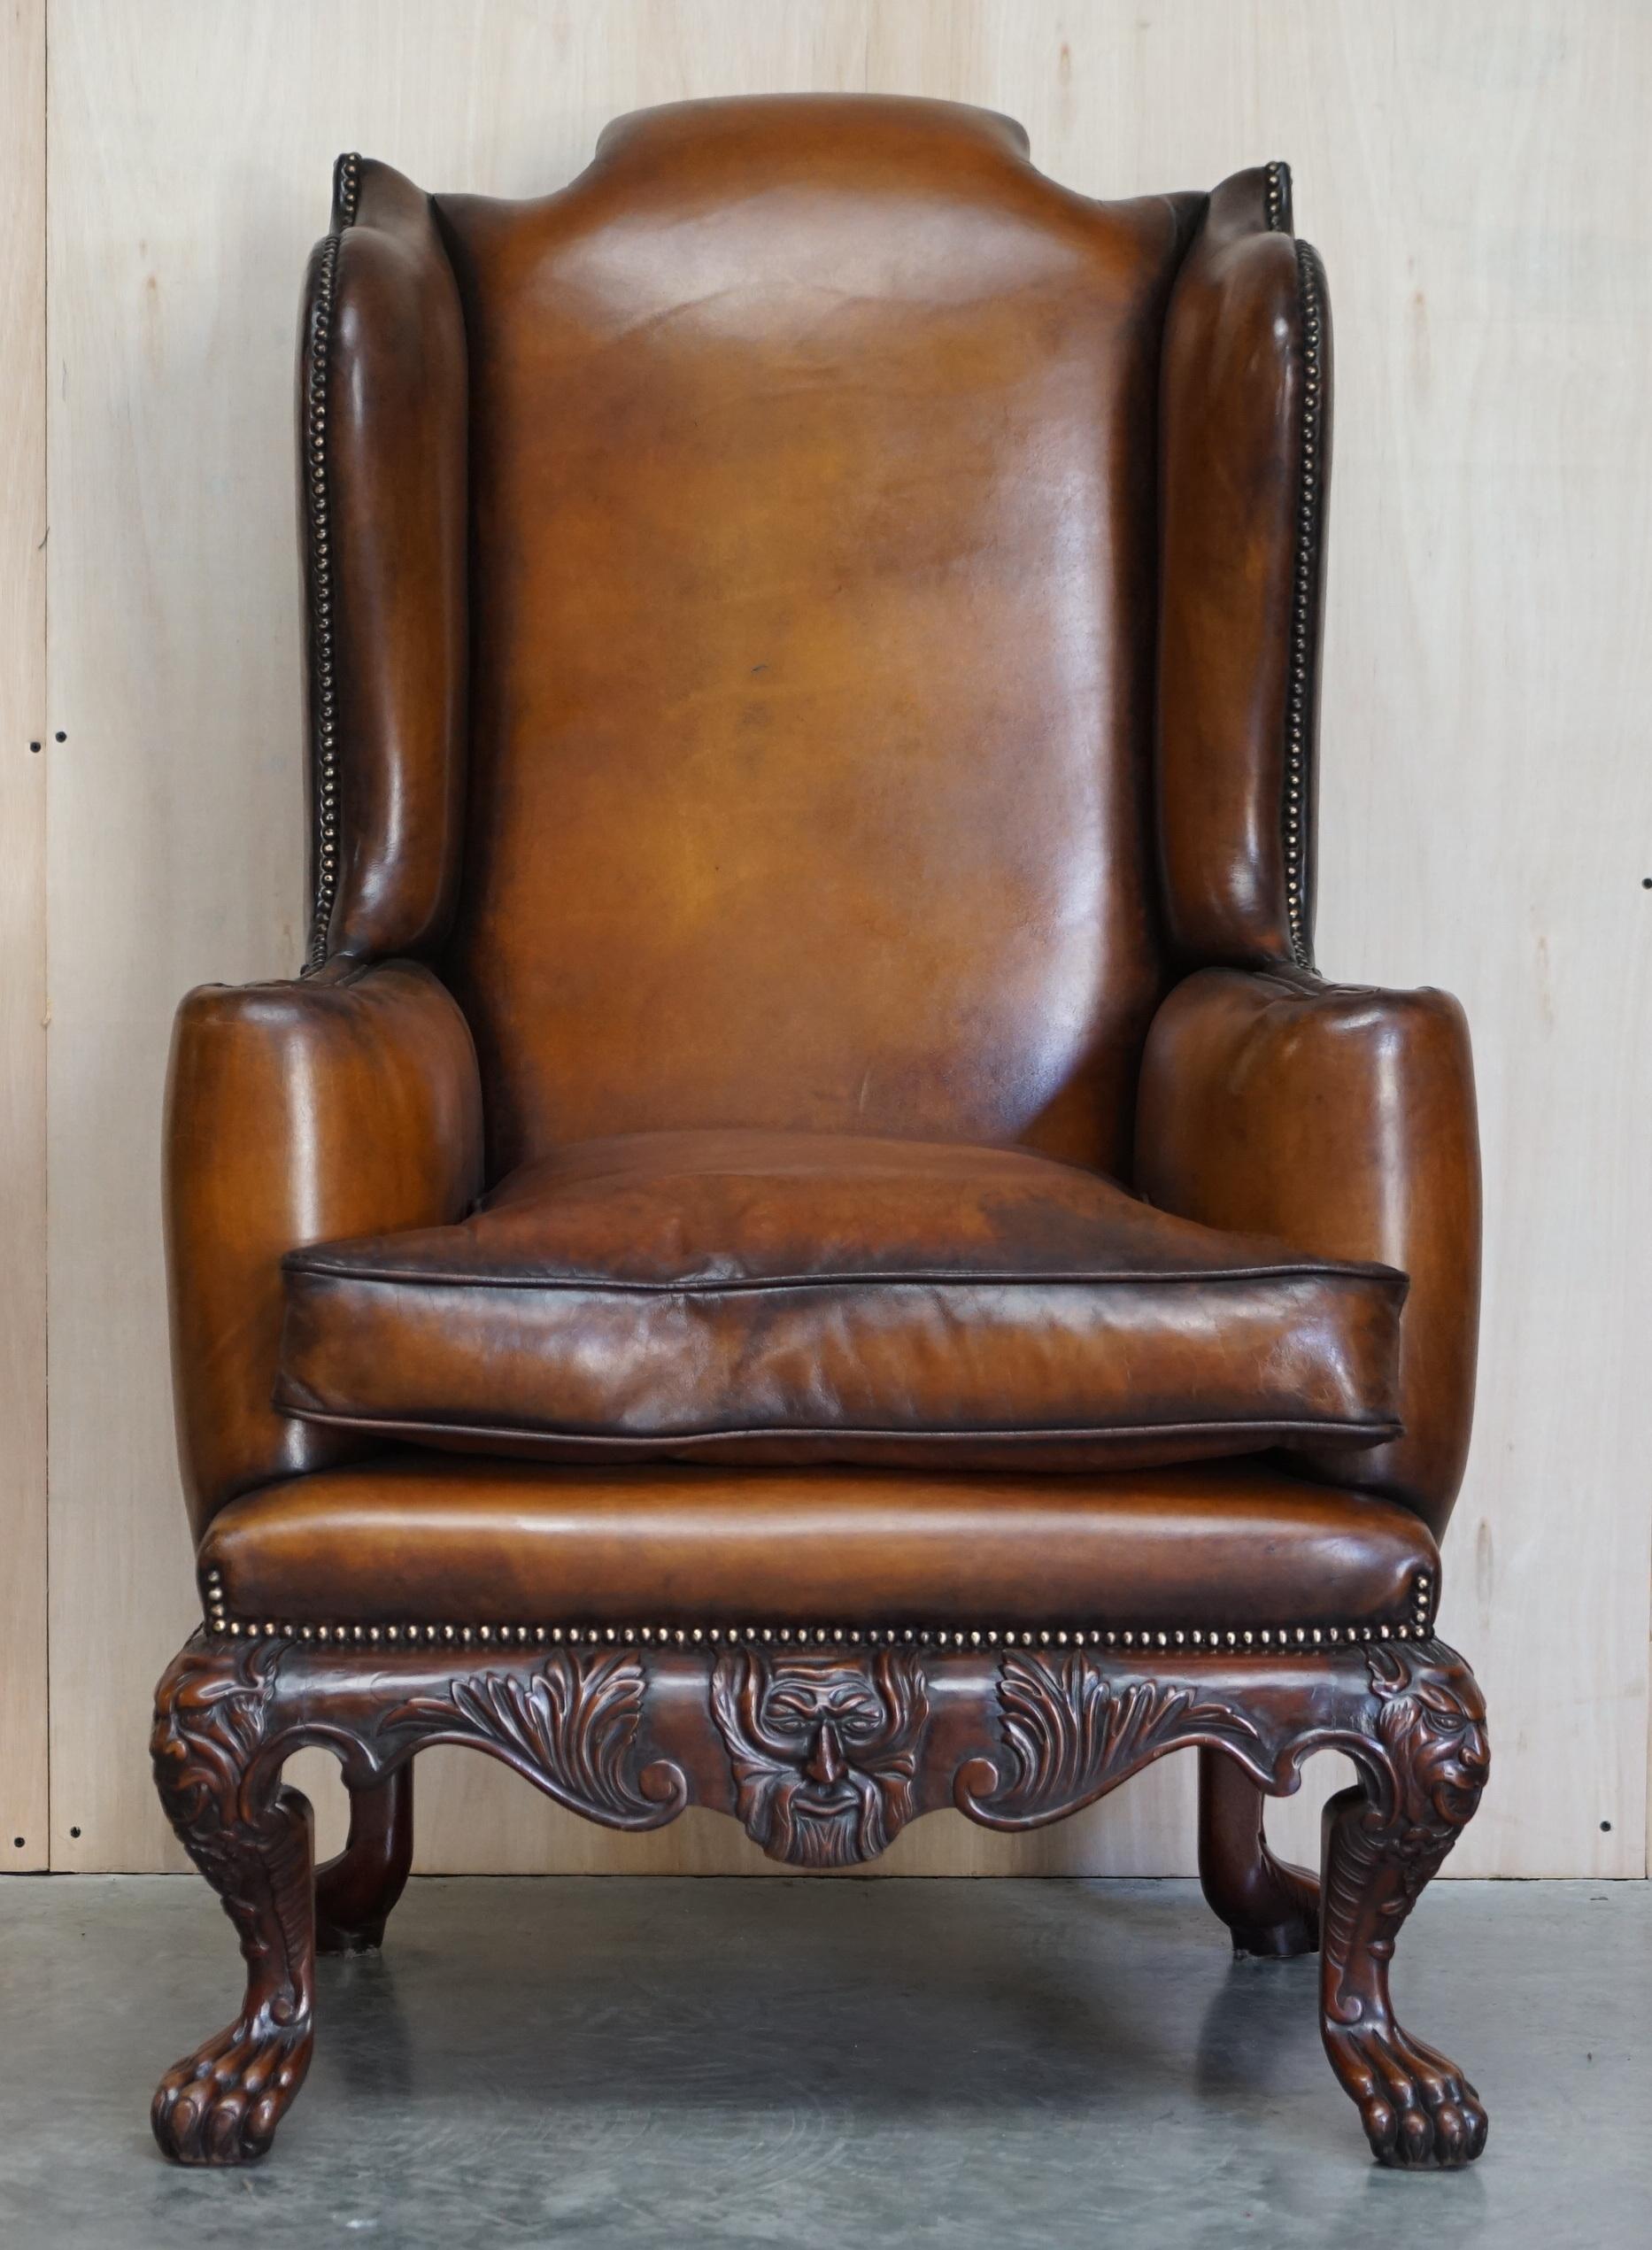 We are delighted to offer for sale this exquisite, heavily carved oversized wingback armchair with stunning base frame depicting lions hairy paw feet

This is a real wow piece, the chair is much larger than normal, it has William Morris type flat